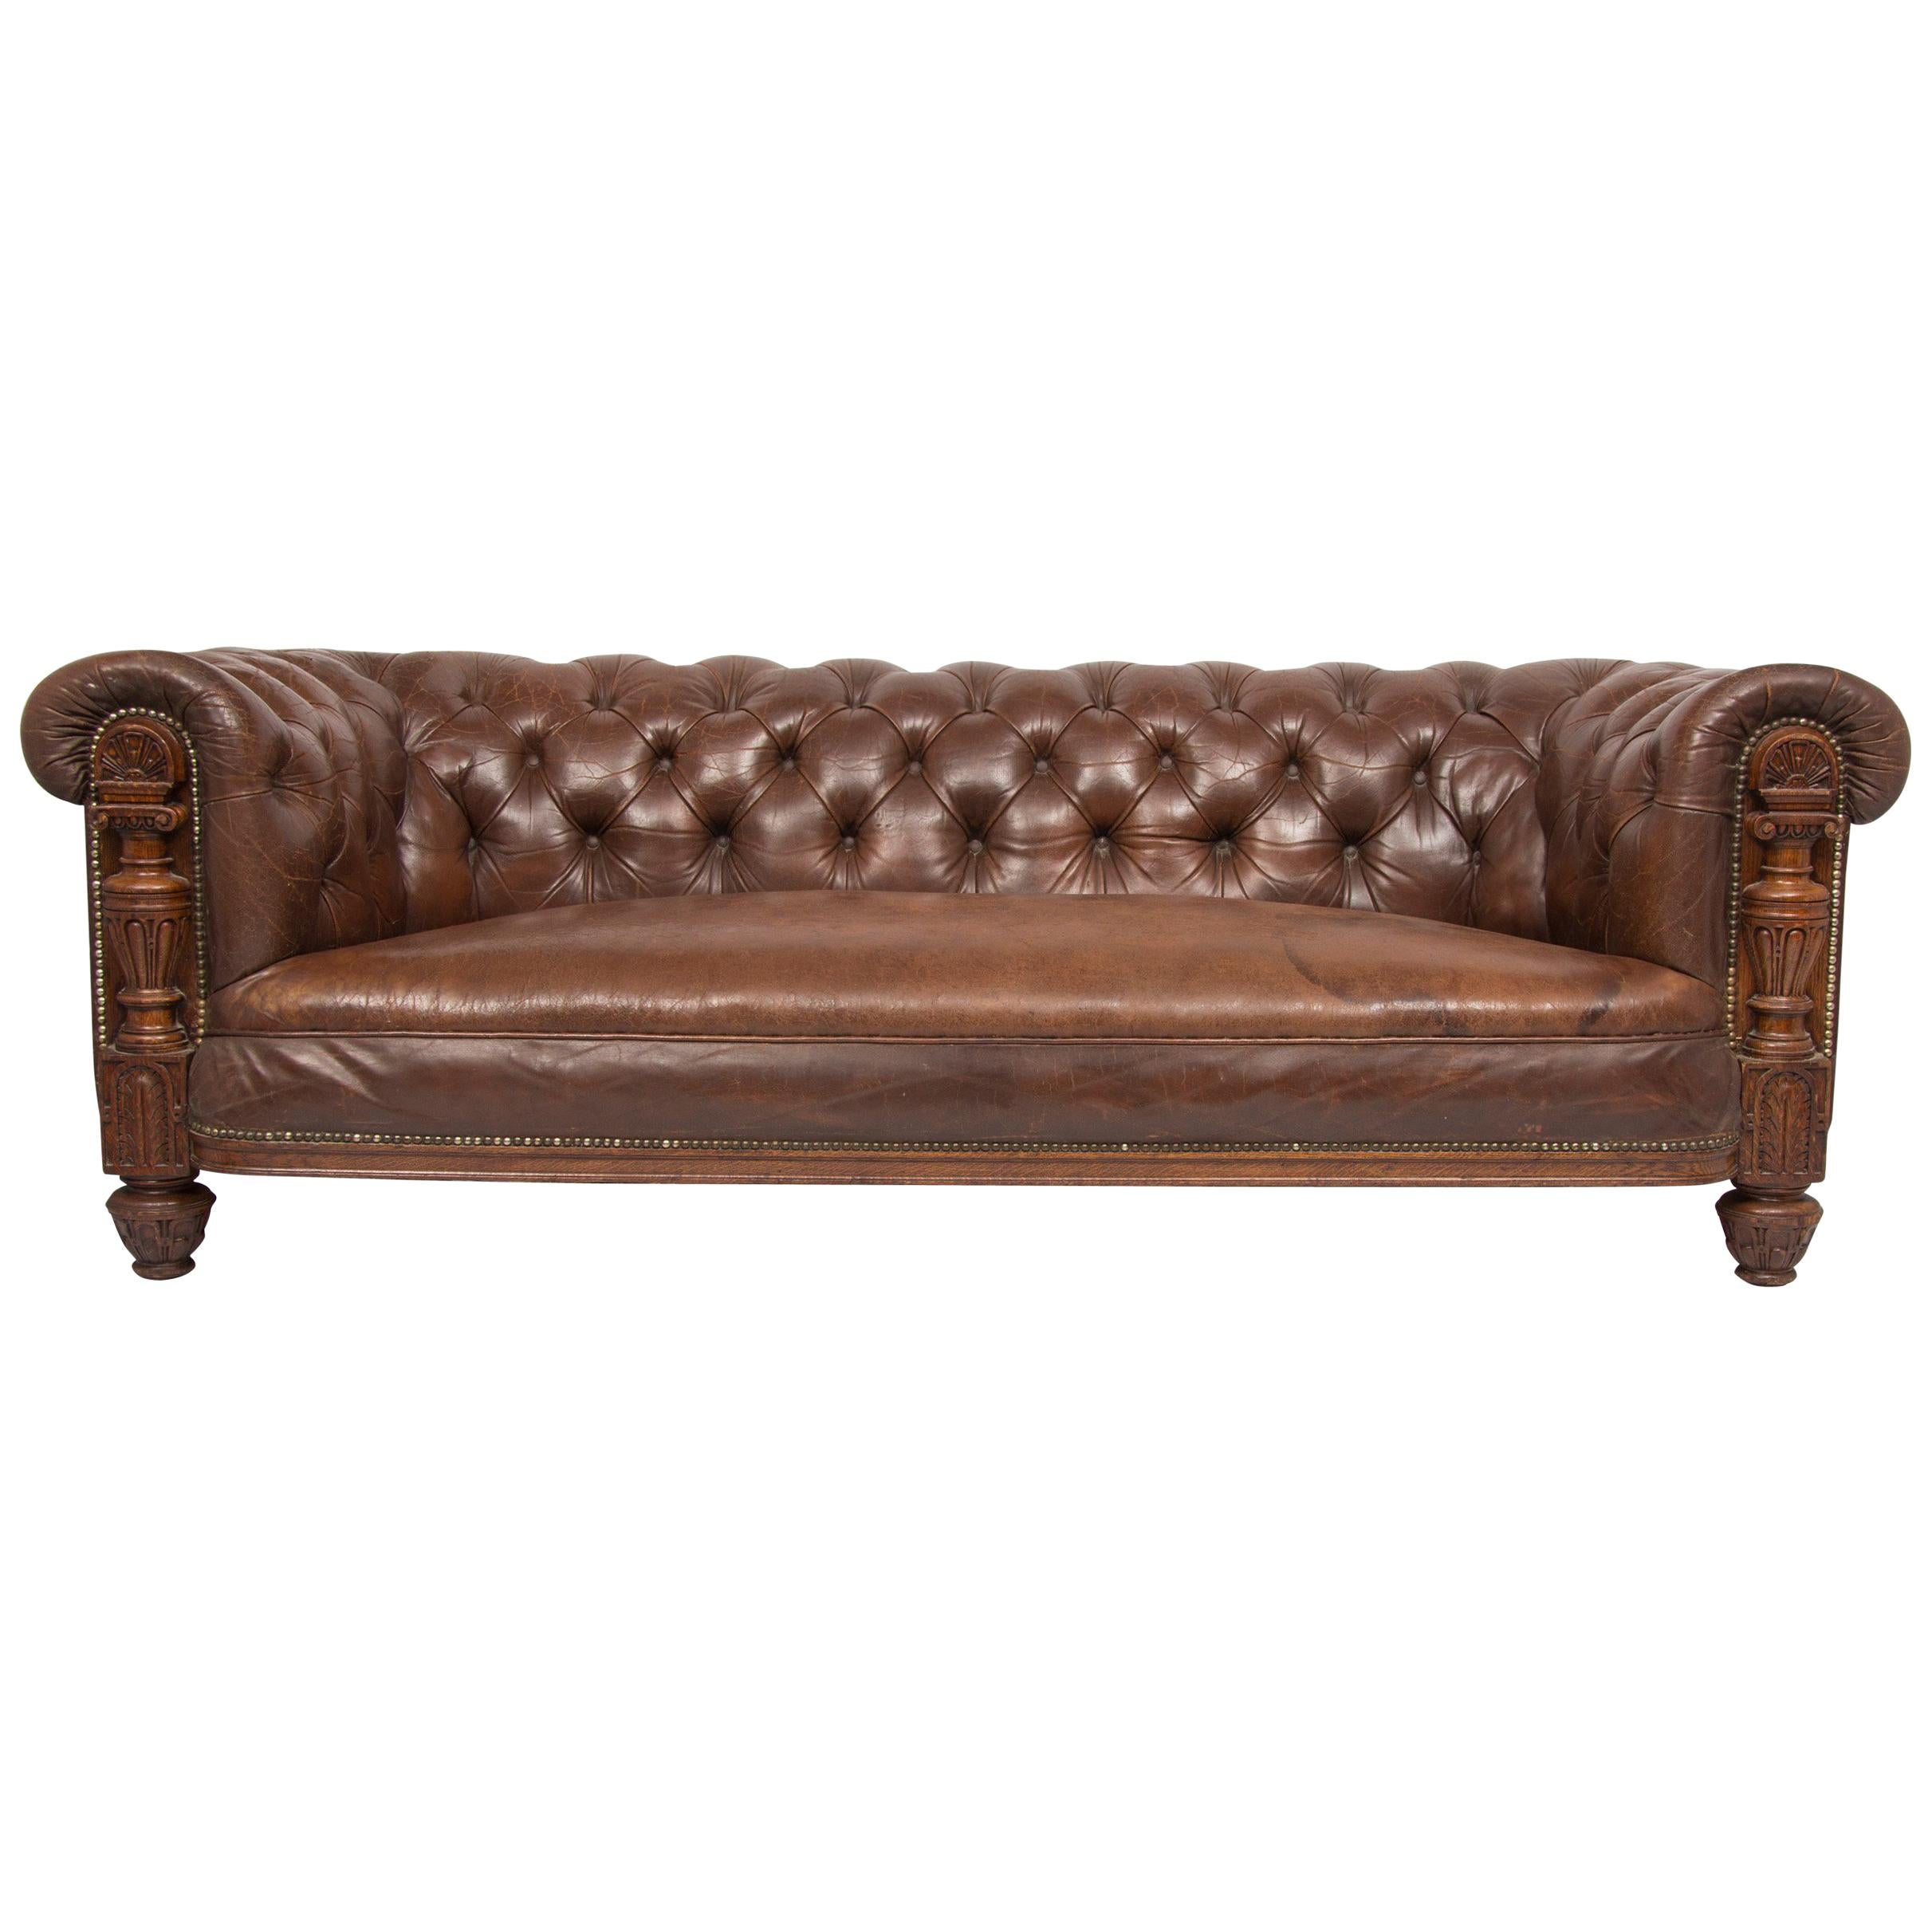 Edwardian Brown Leather Chesterfield Sofa.